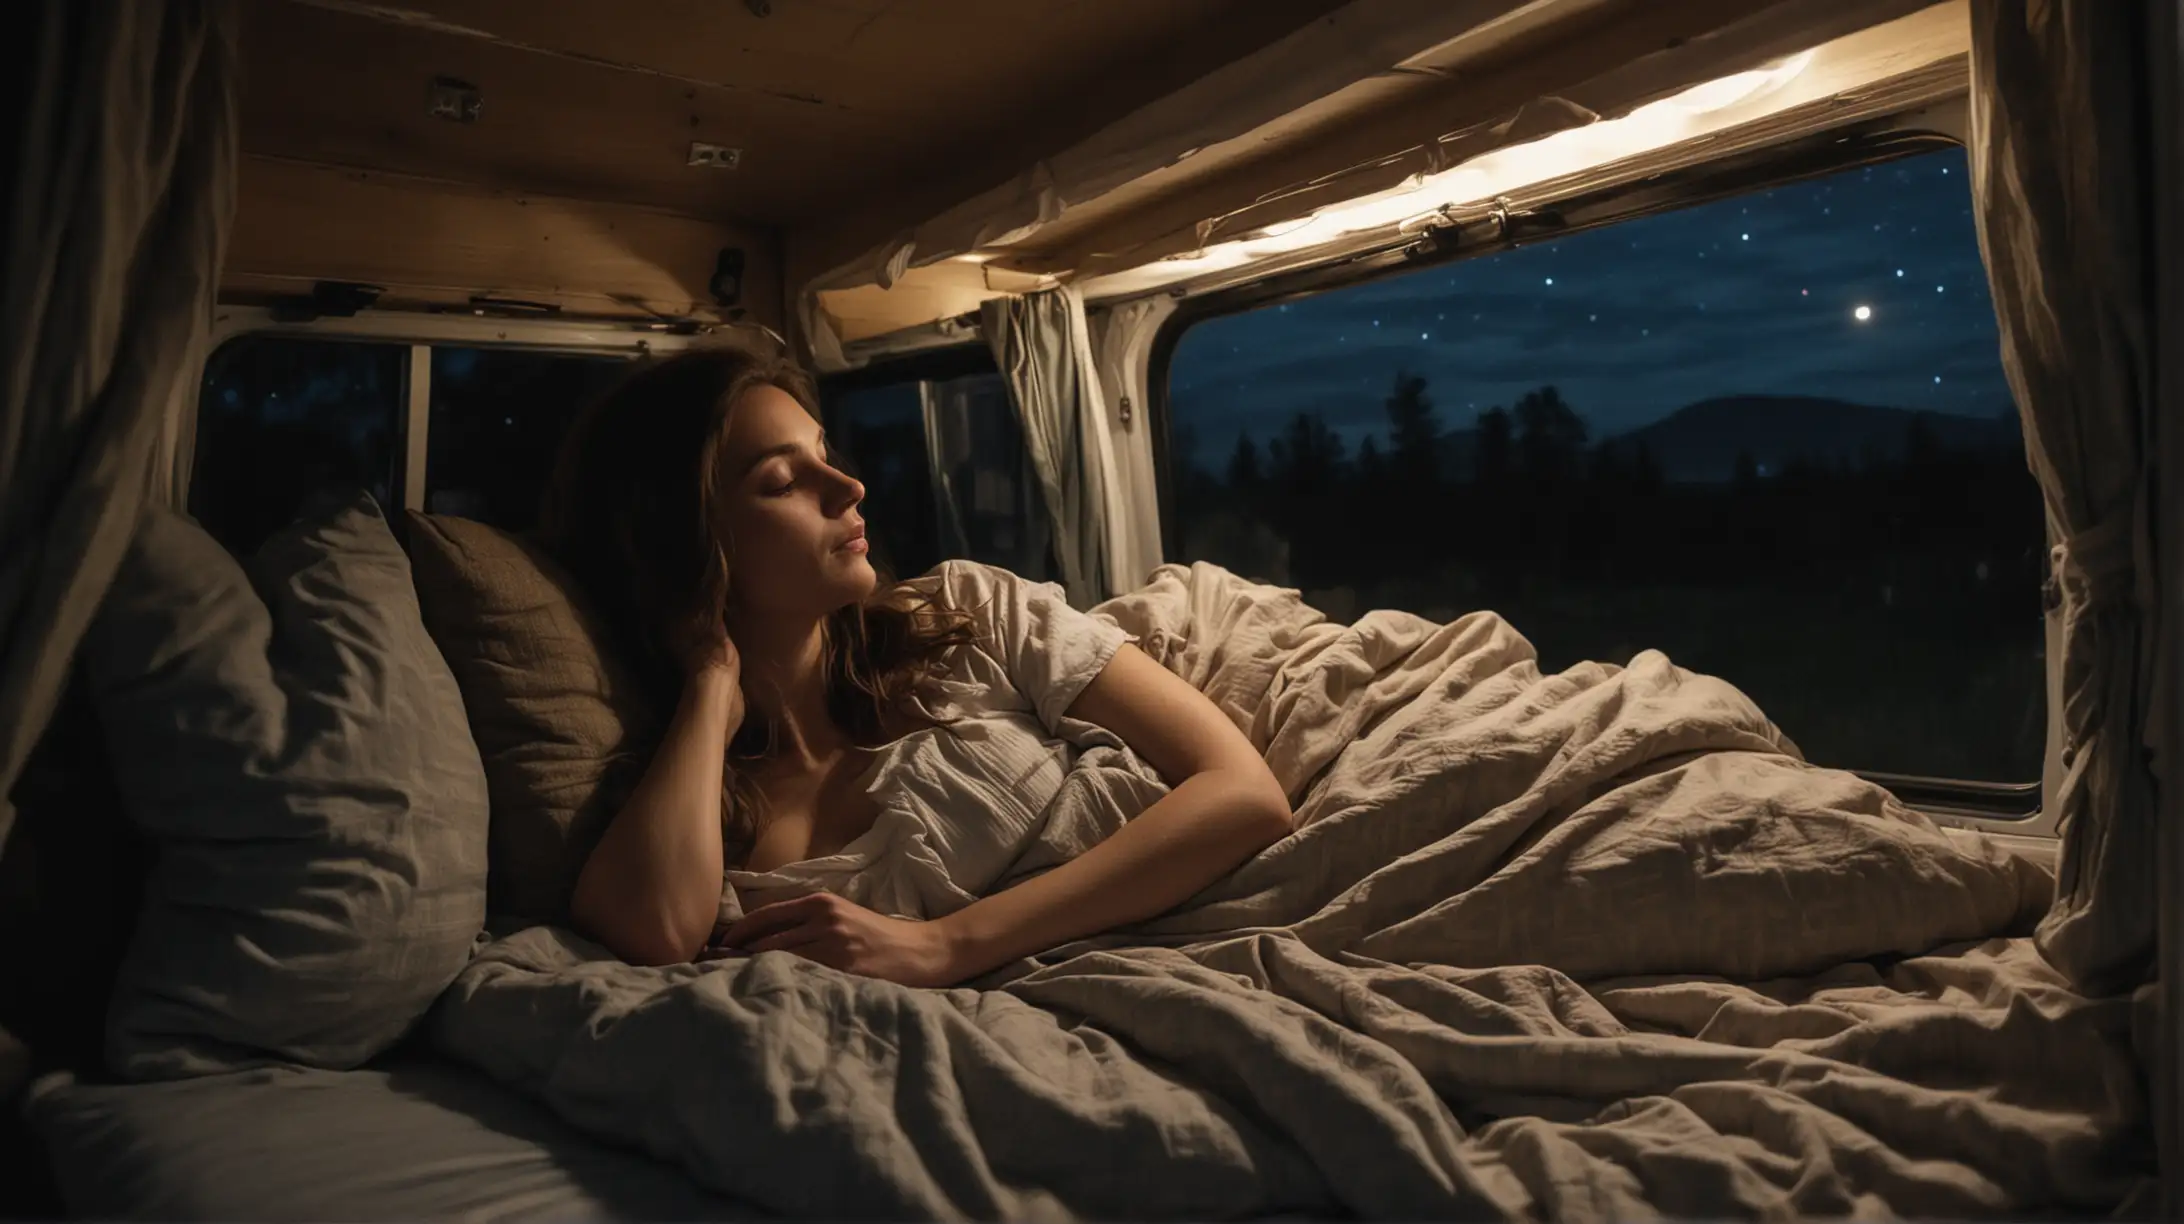 an beautiful woman peacefully sleeps in a camper van at night. The scene is dark Through the windows, a road leading off into the distance is visible, hinting at the tranquility of the surroundings. body stretched out and lieing down flat with head on pillow, the womans head resting on a pillow. Capture the serenity and coziness of the moment